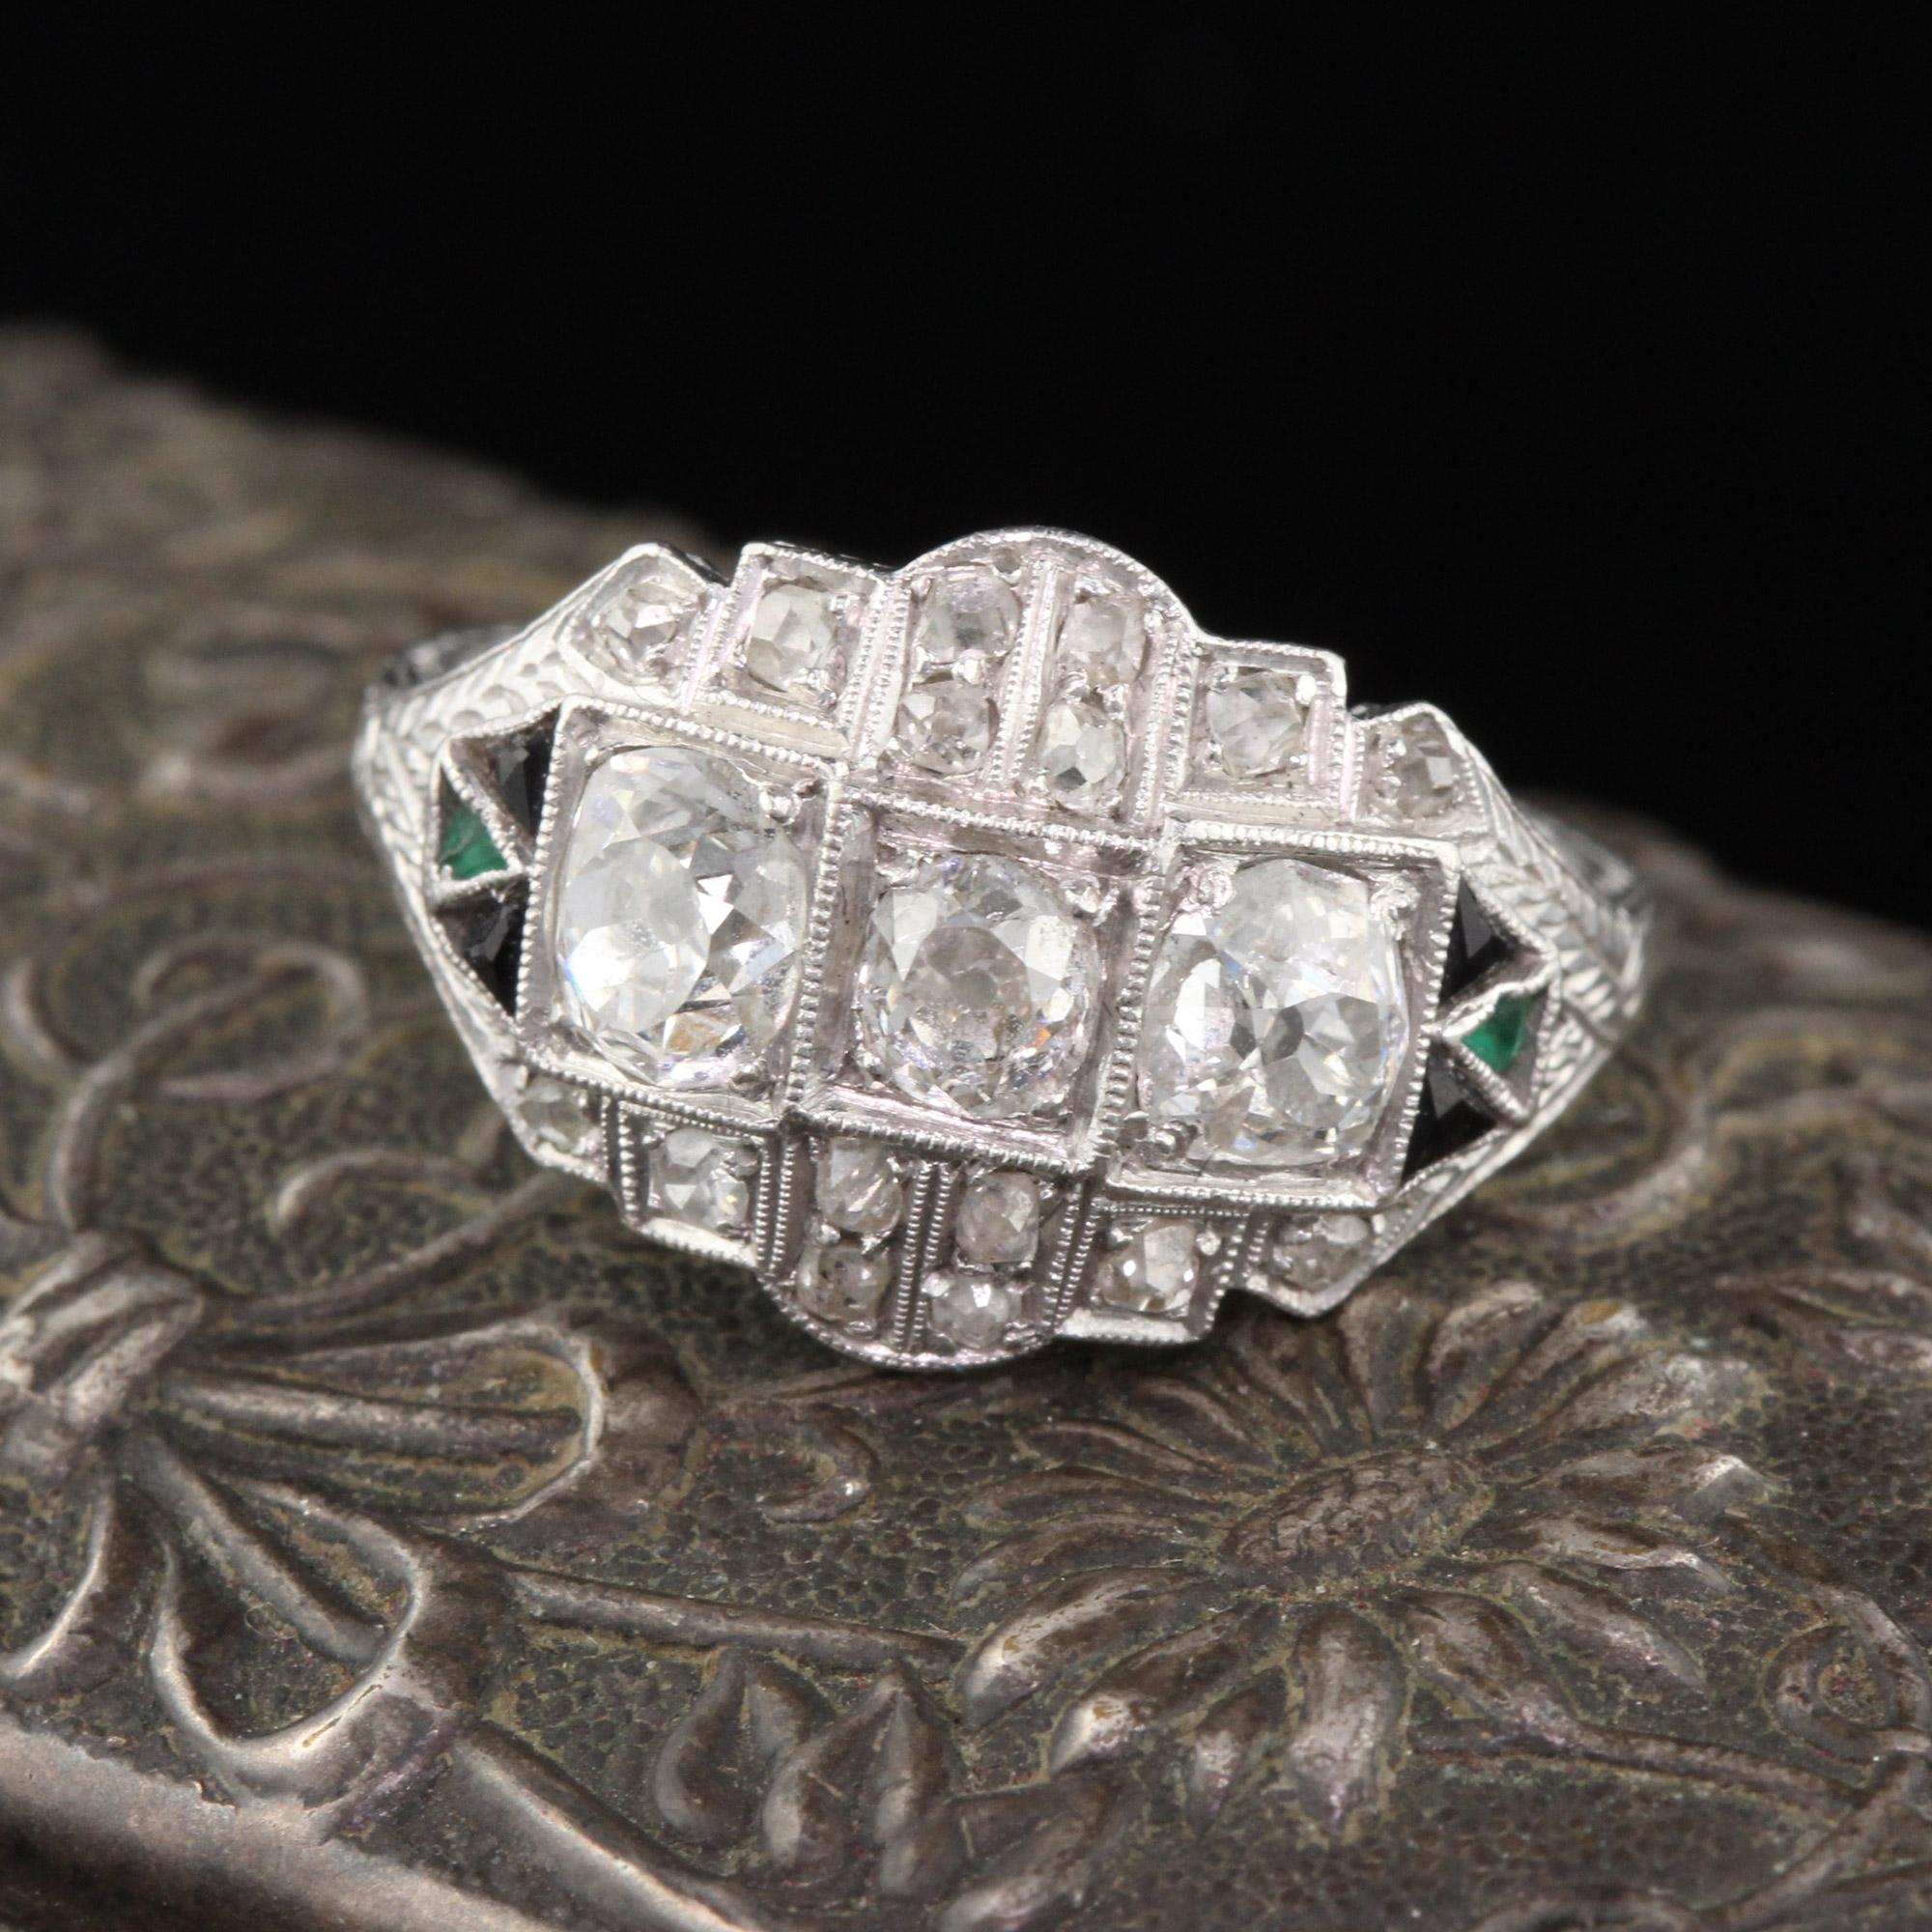 Antique Art Deco Platinum 3-stone ring with diamonds & triangular cut onyx and emeralds. 

#R0082

Metal: Platinum

Weight: 5 grams

Diamond Weight: Approximately 1 ctw

Diamond Color: I

Diamond Clarity: SI2

Ring Size: 7

This ring can be sized